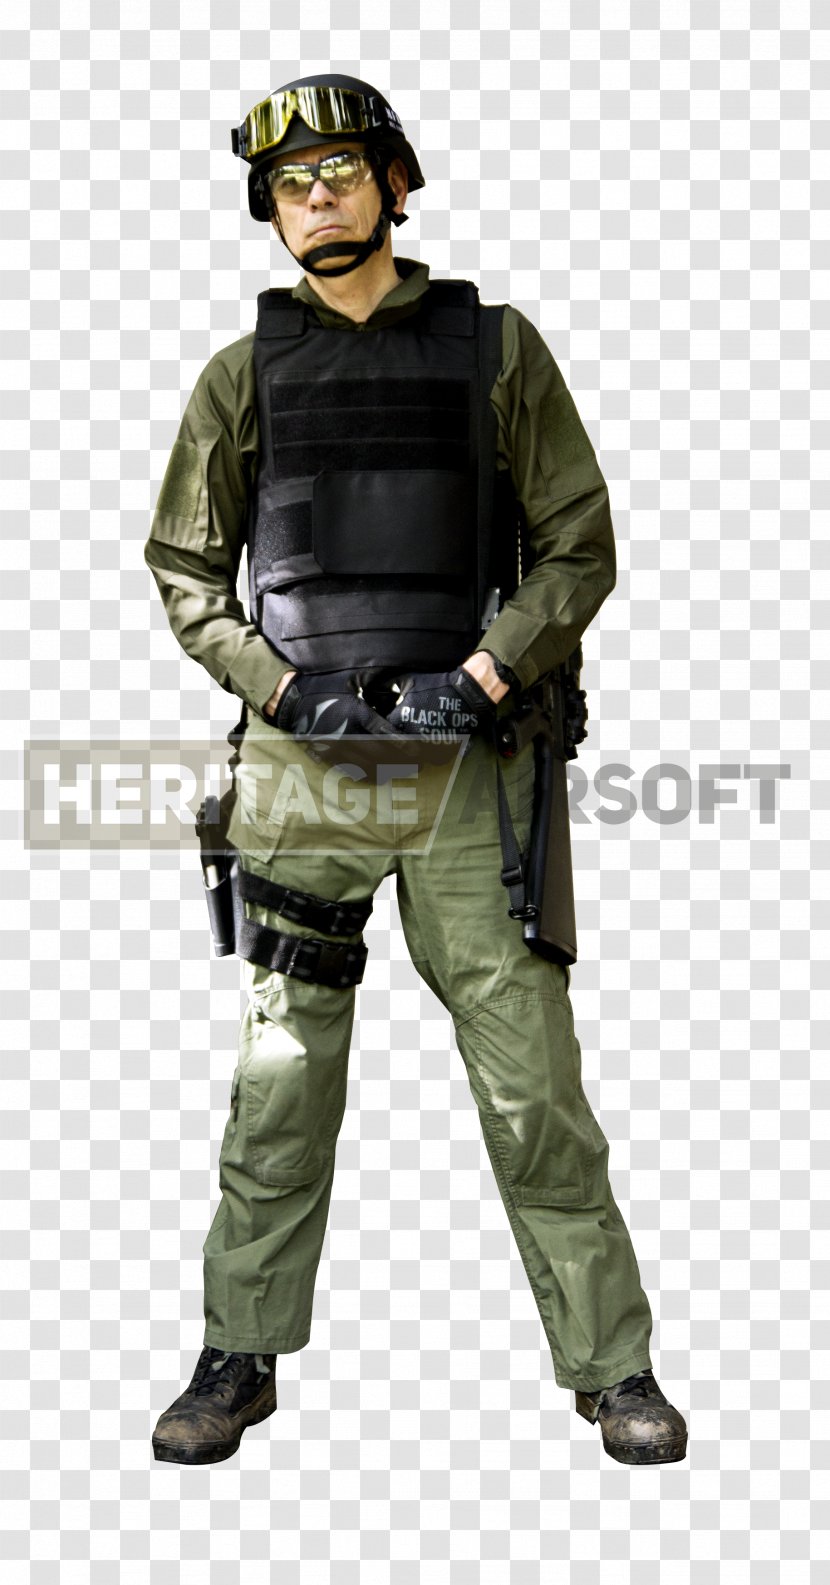 Soldier Military Uniform United States Spider-Man - Non Commissioned Officer - Bulletproof Transparent PNG